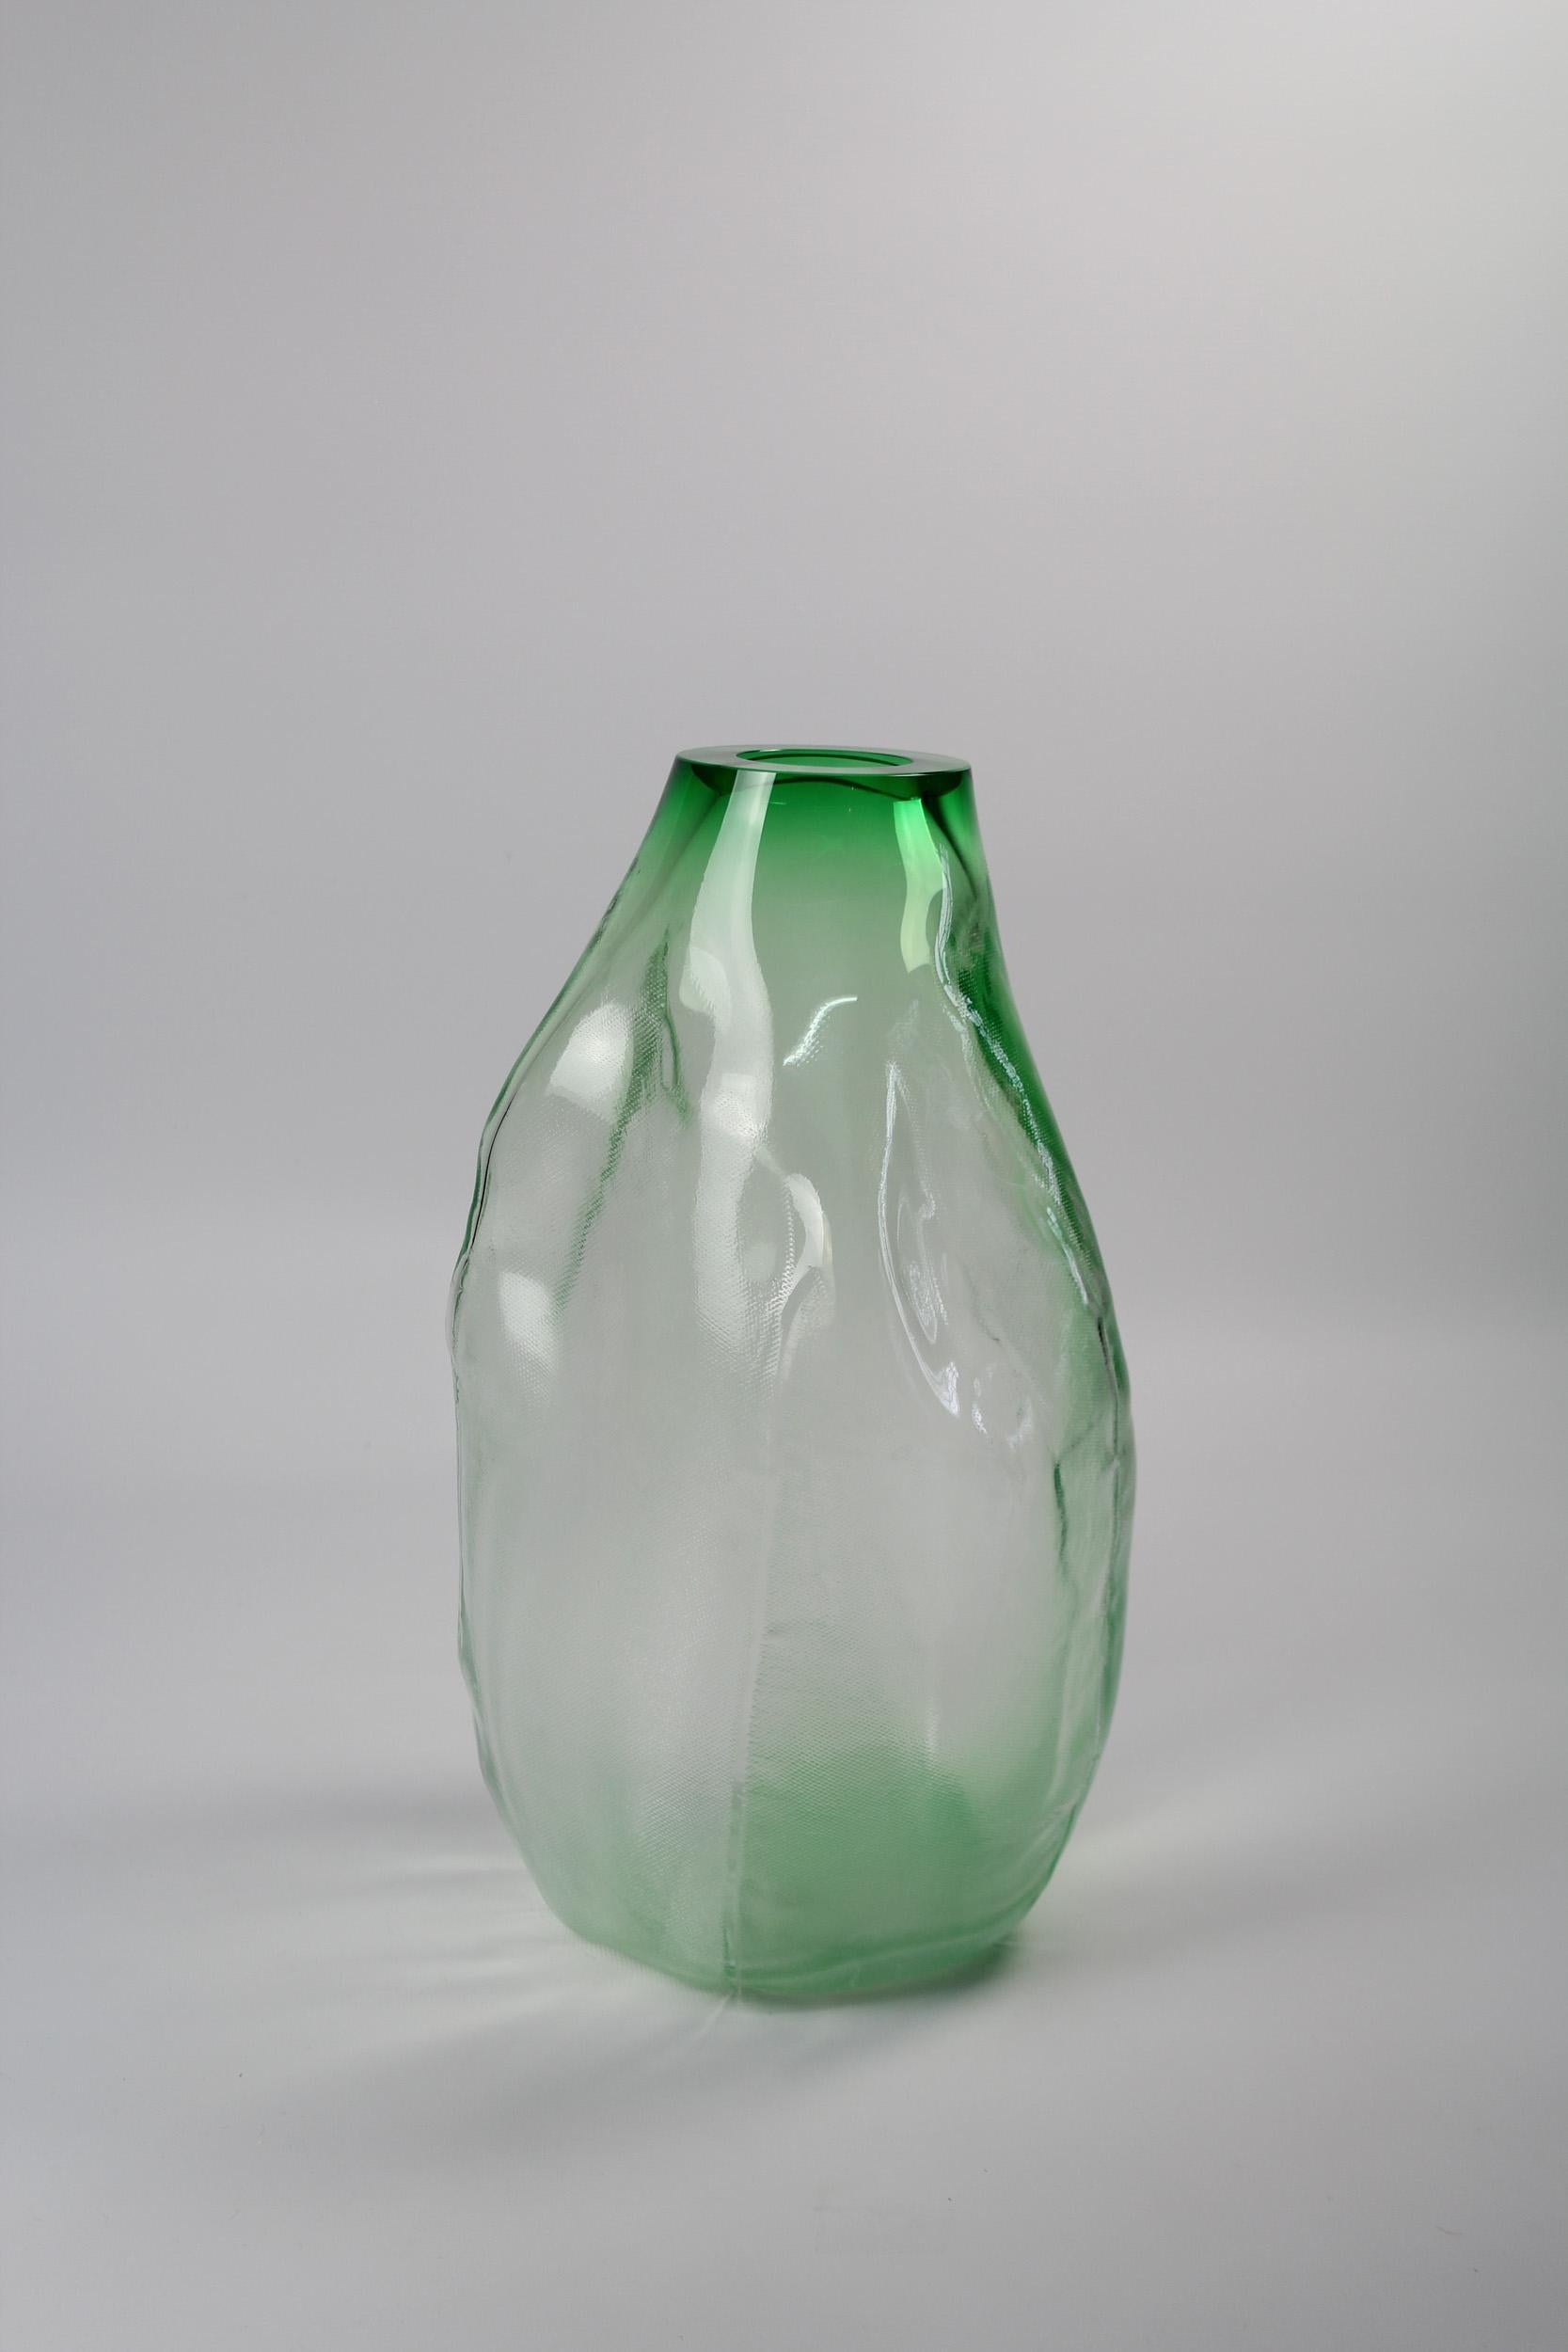 105 Ltr Forms, Beryl Green, Handmade Glass Object by Vogel Studio In New Condition For Sale In Sarstedt, NI